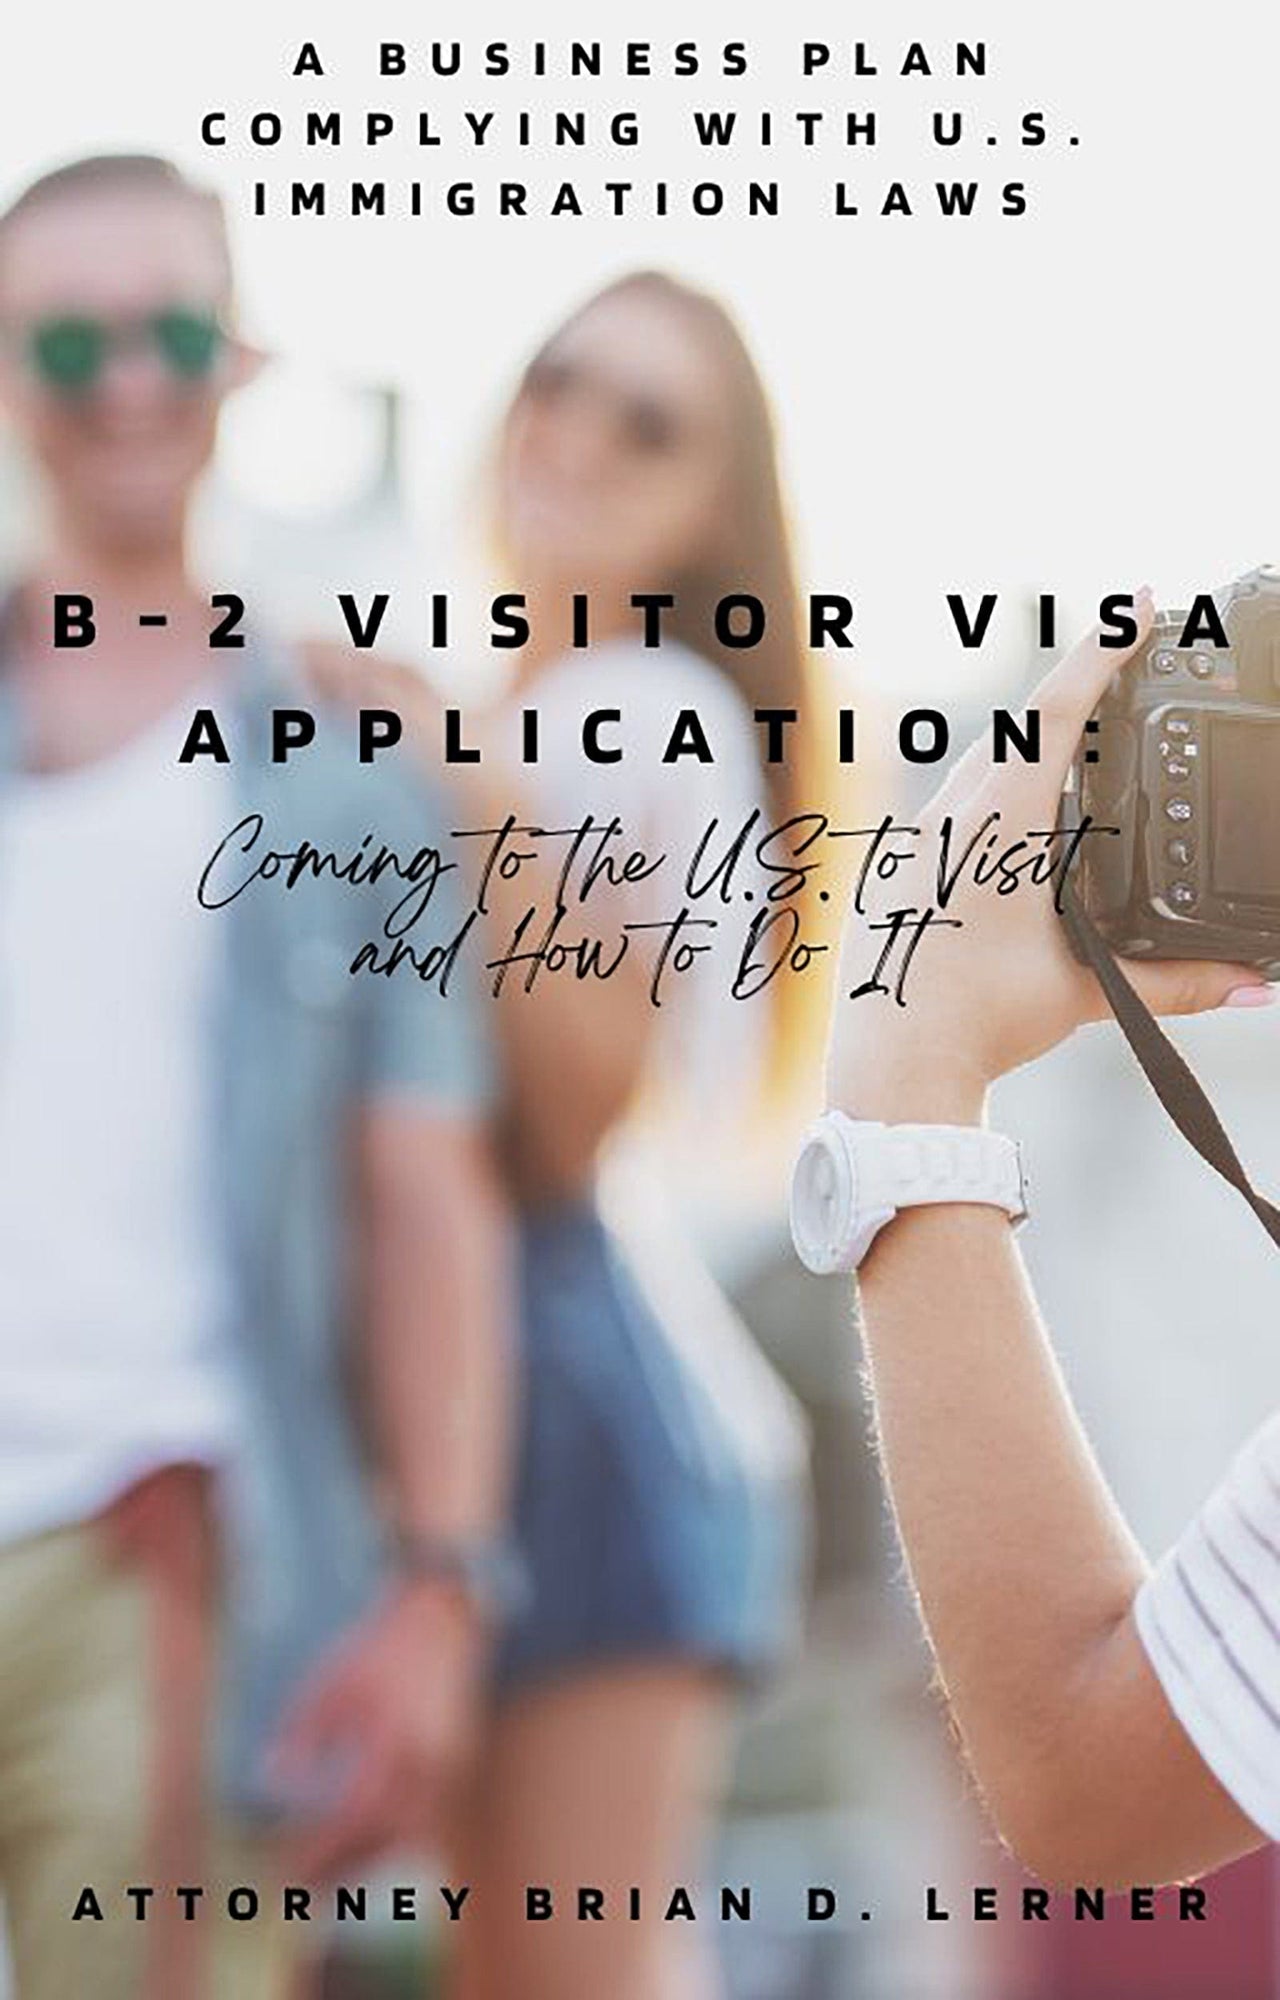 Rocket Immigration Petitions Immigration Visa B-2 Visitor Visa Application: Coming to the U.S. to Visit and How to Do It